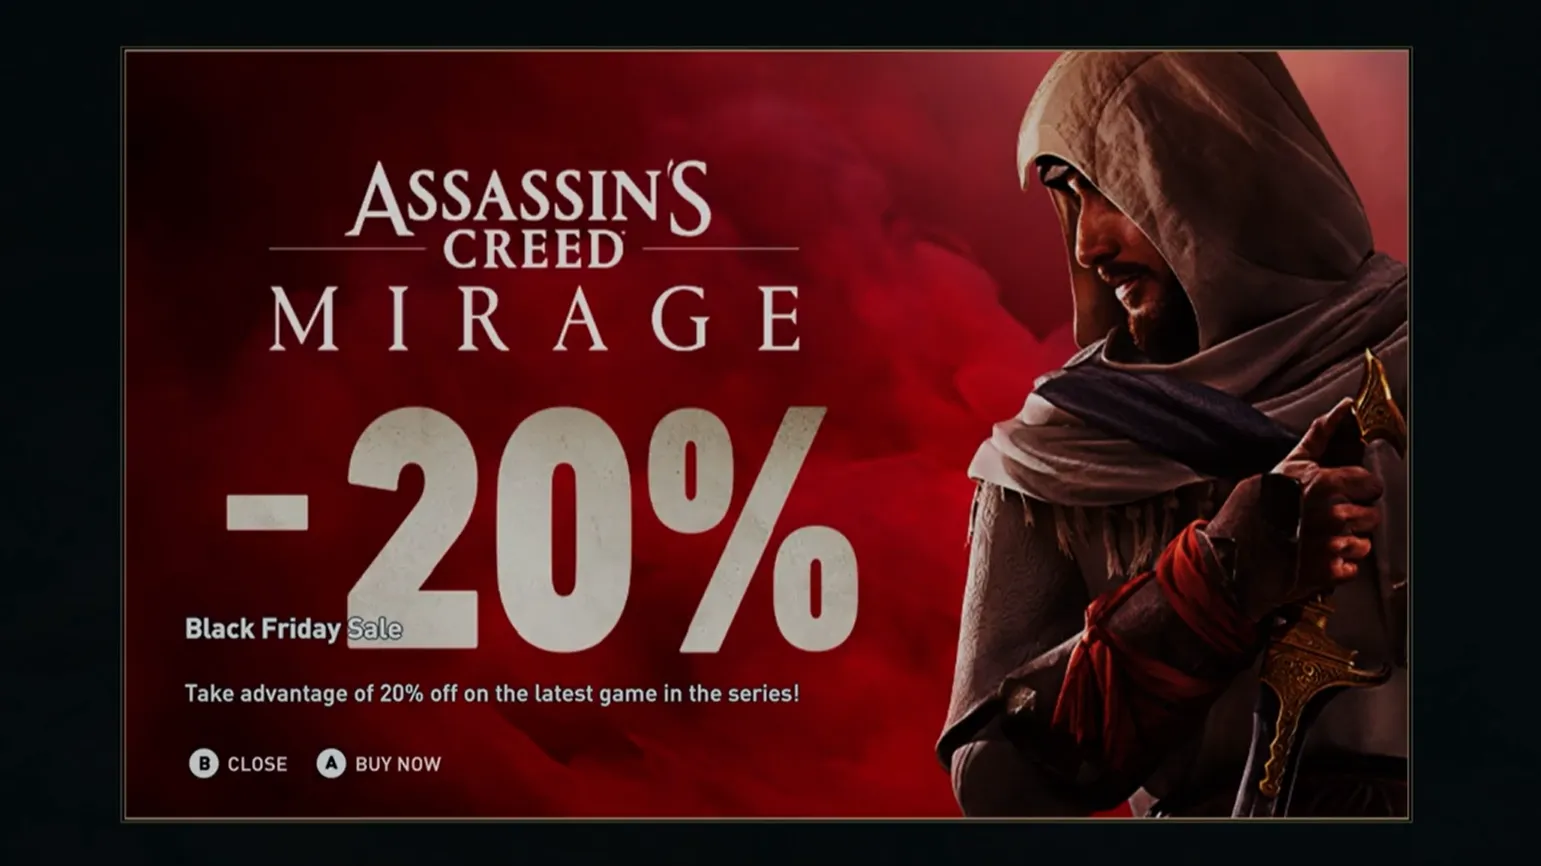 Assassin’s Creed Players Get Their Game Interrupted By Full Screen Ads For Assassin’s Creed Mirage